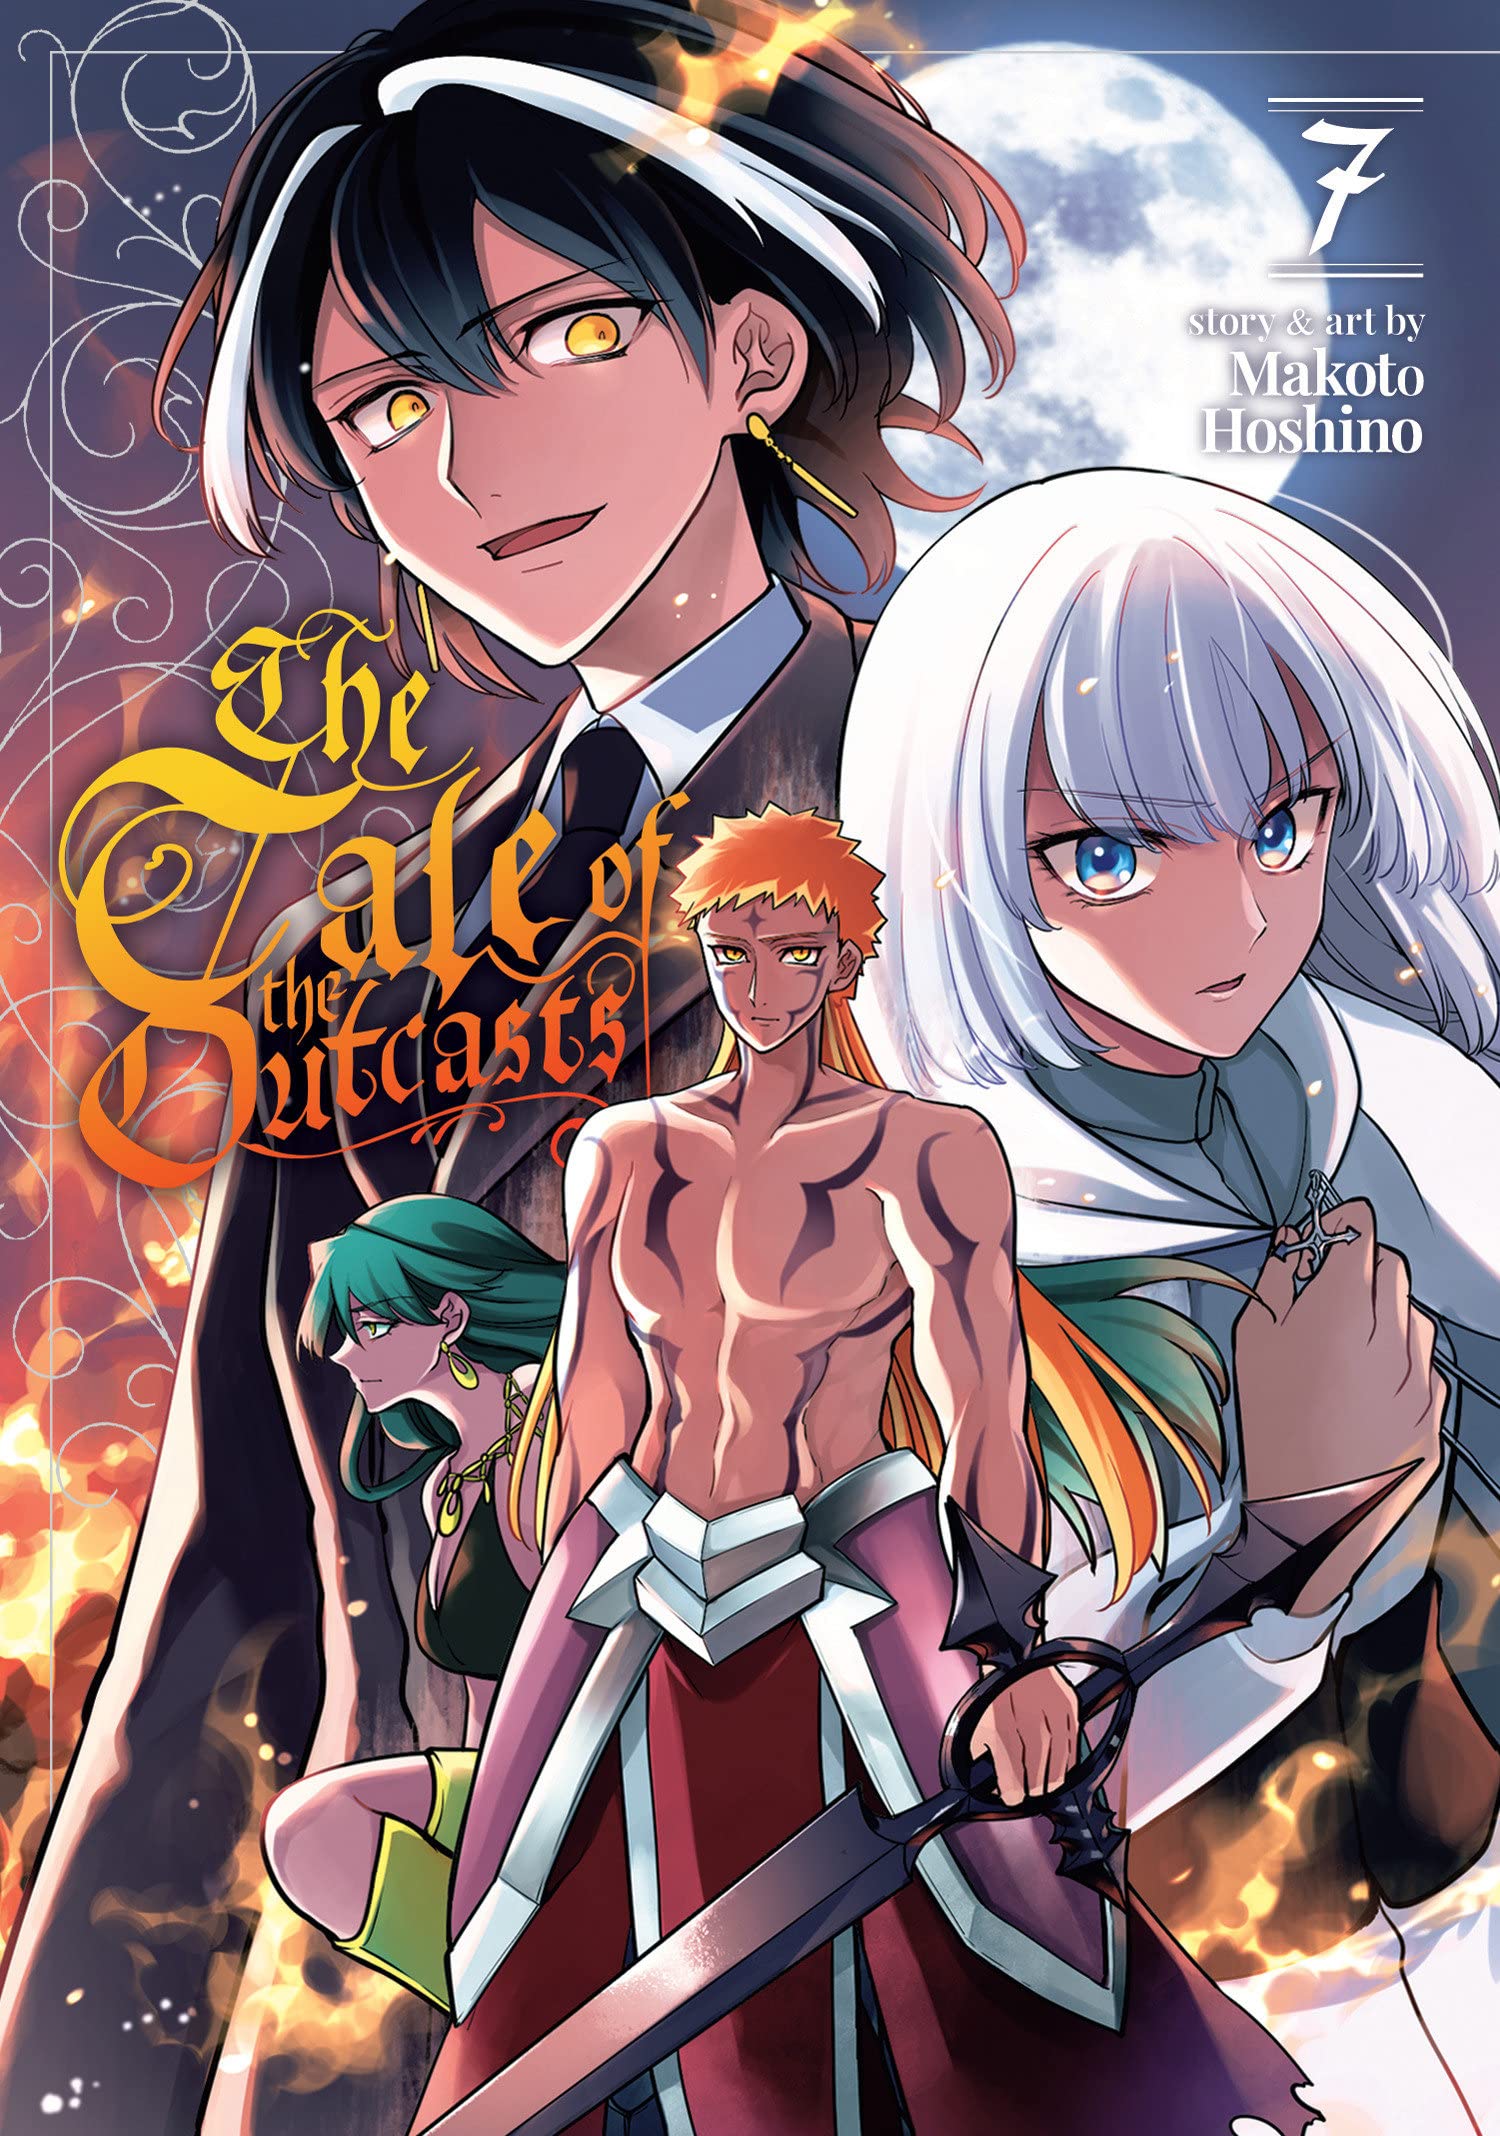 The Tale of the Outcasts Vol. 07